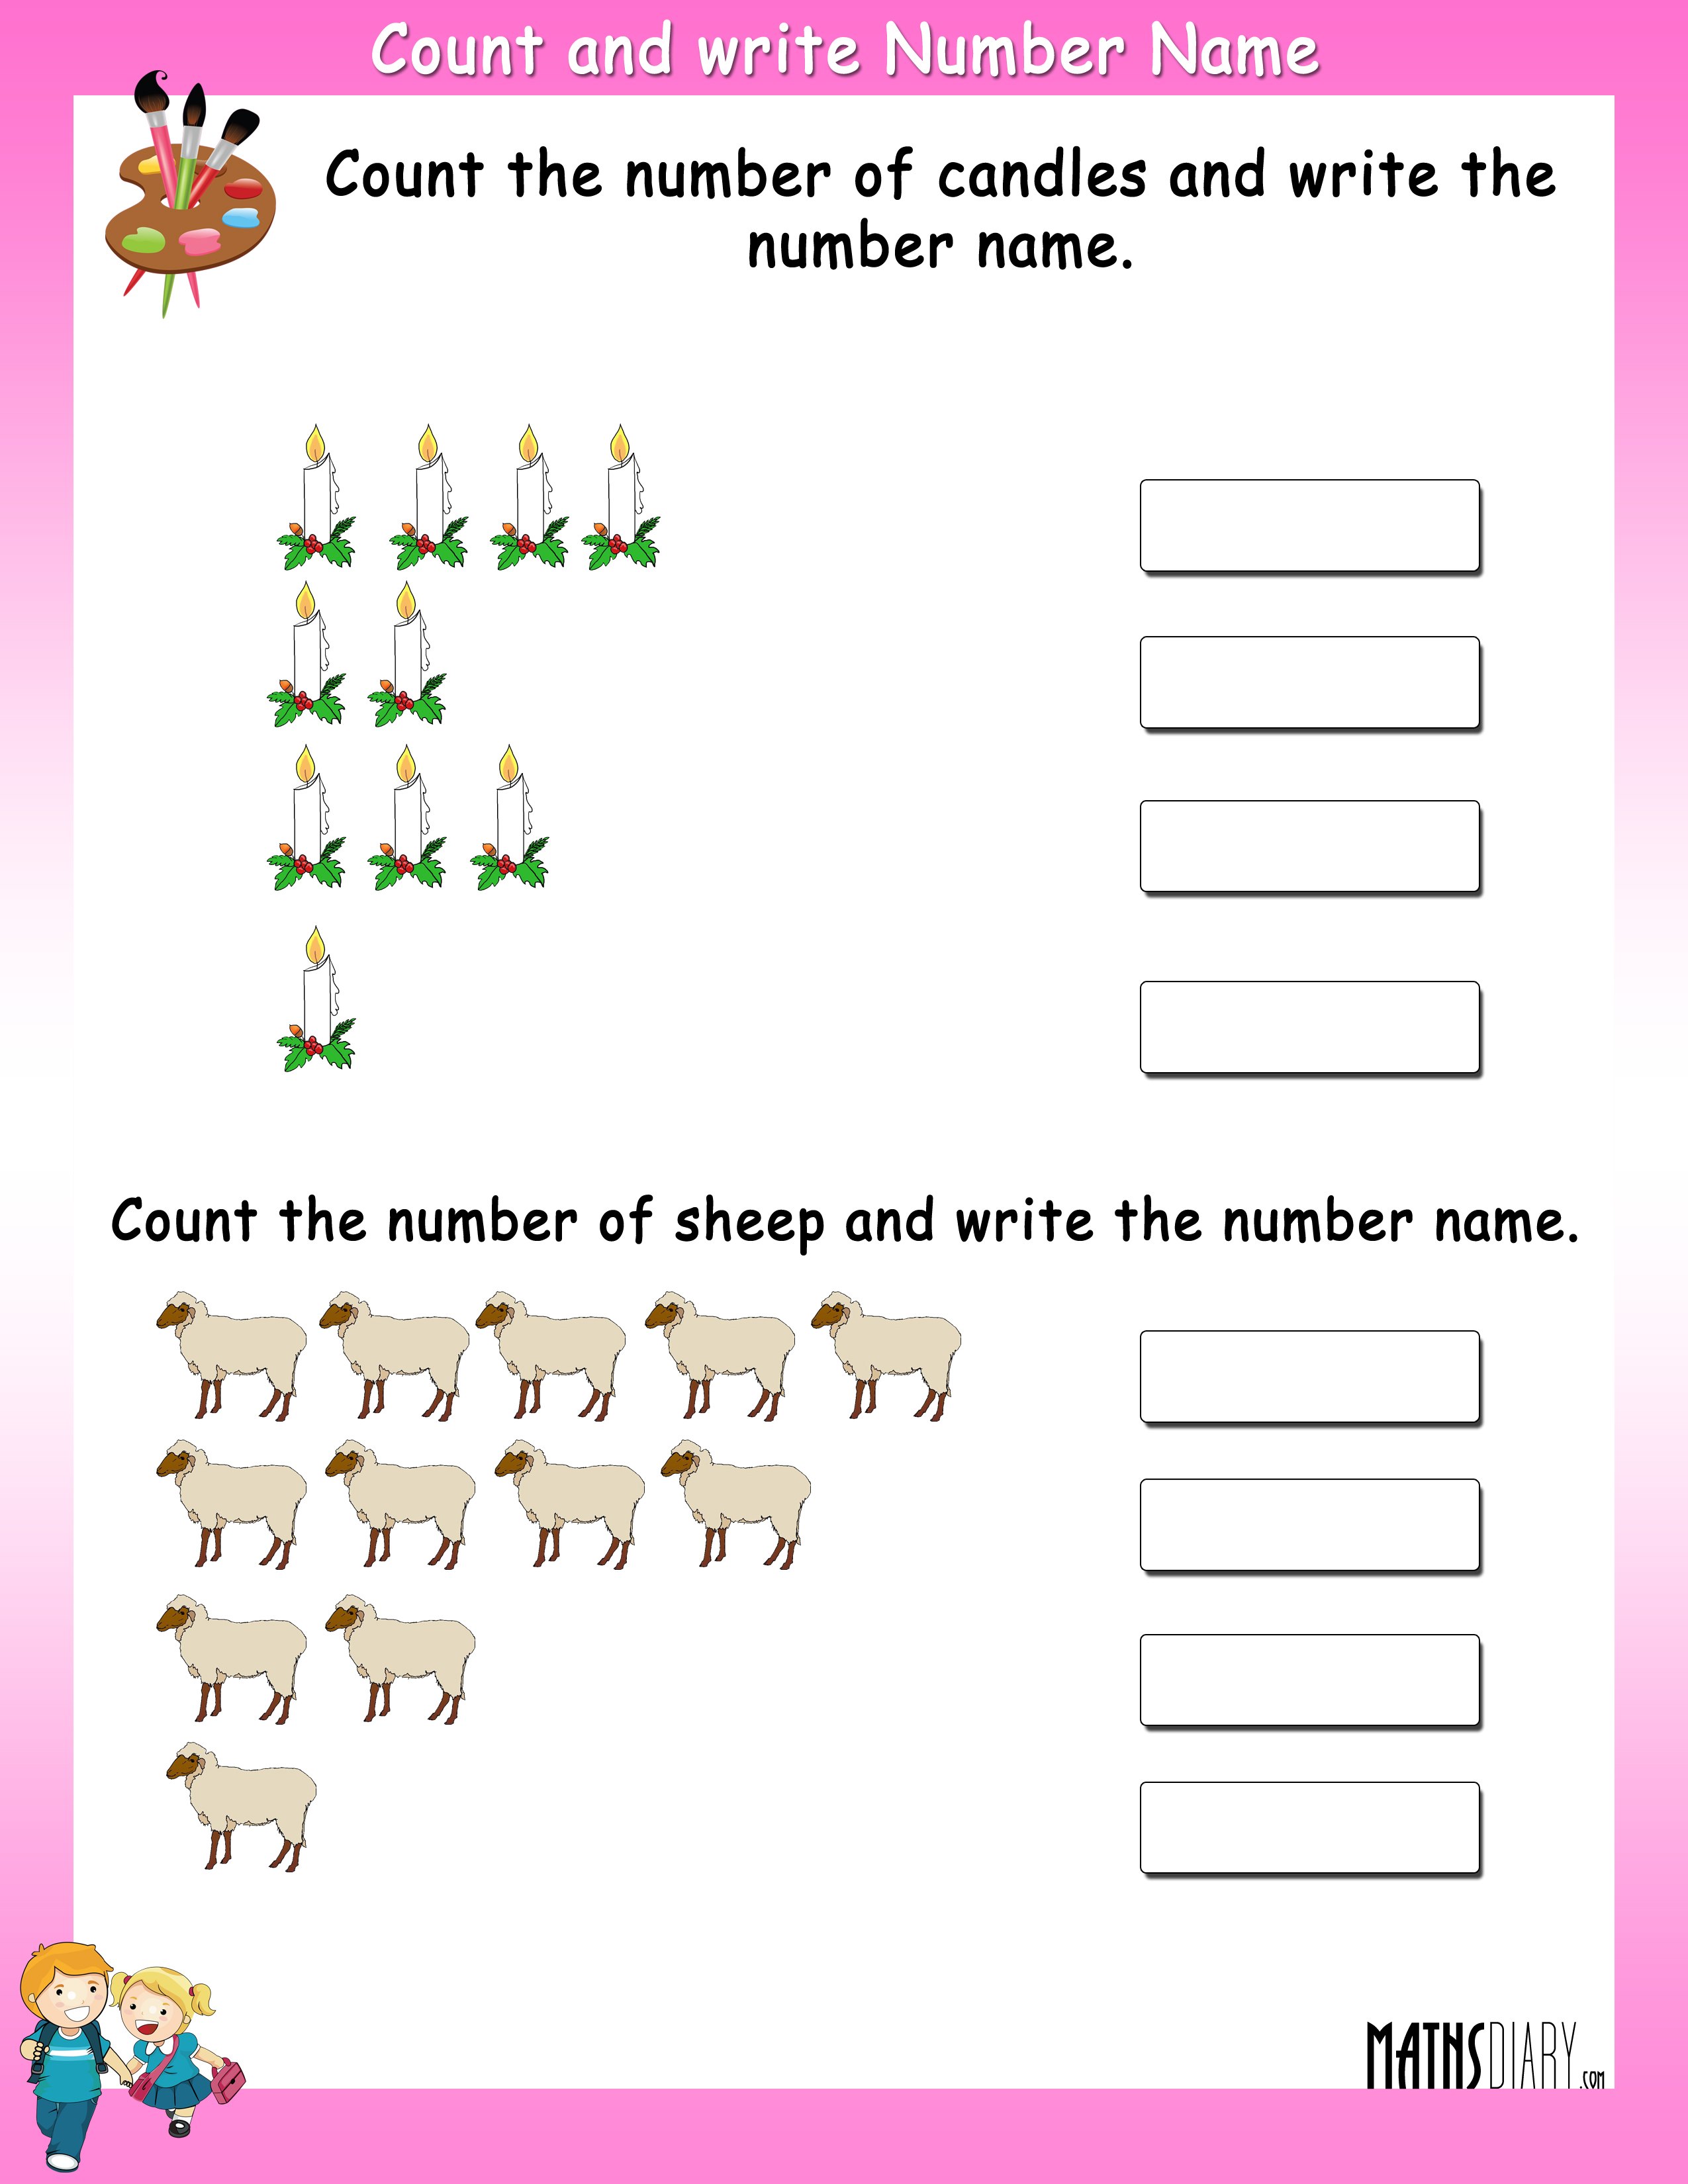 Count And Write Number Names Math Worksheets MathsDiary